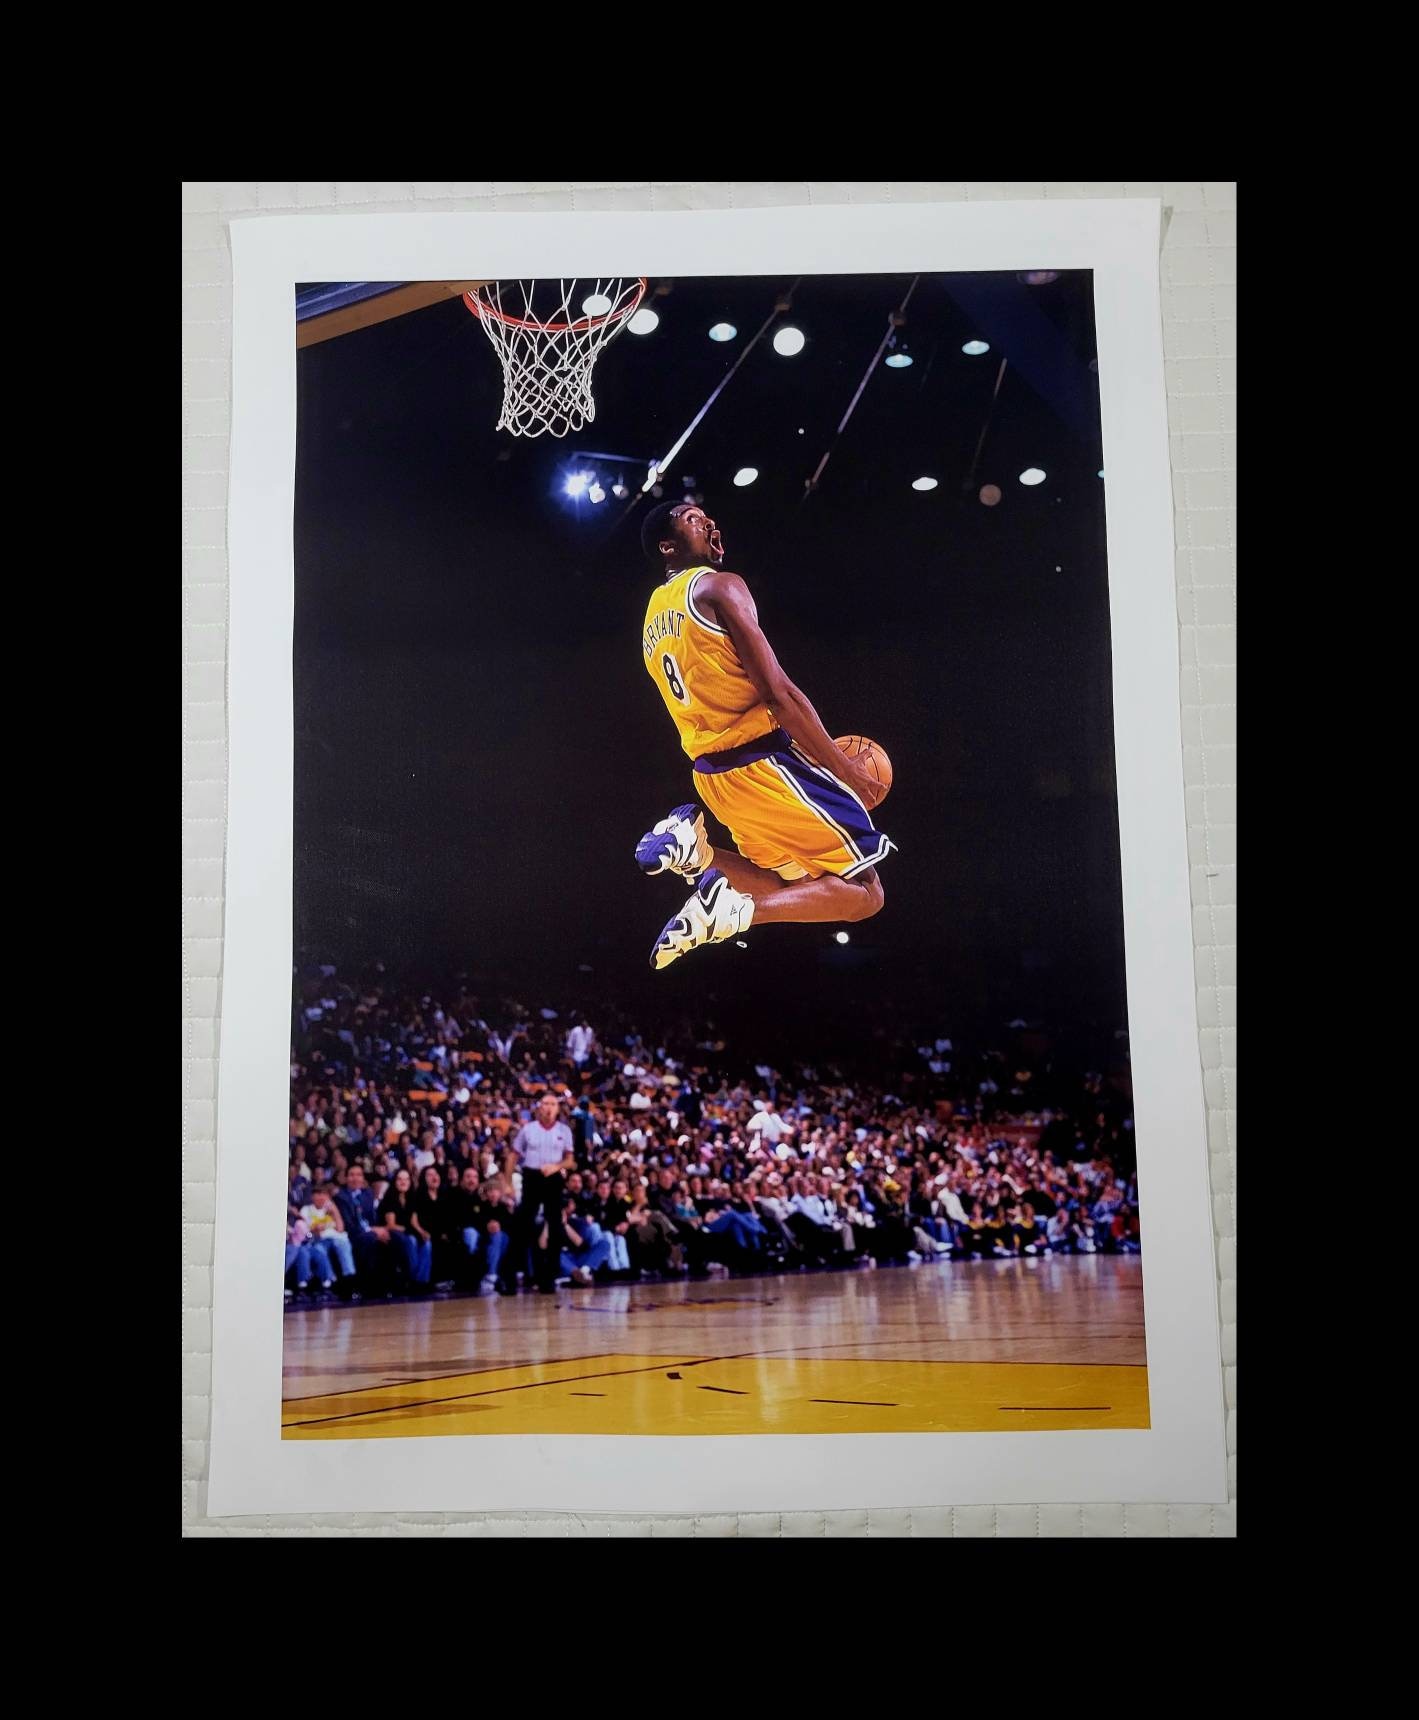 Painted jersey of Kobe Bryant mid-dunk during the 2001 NBA Finals